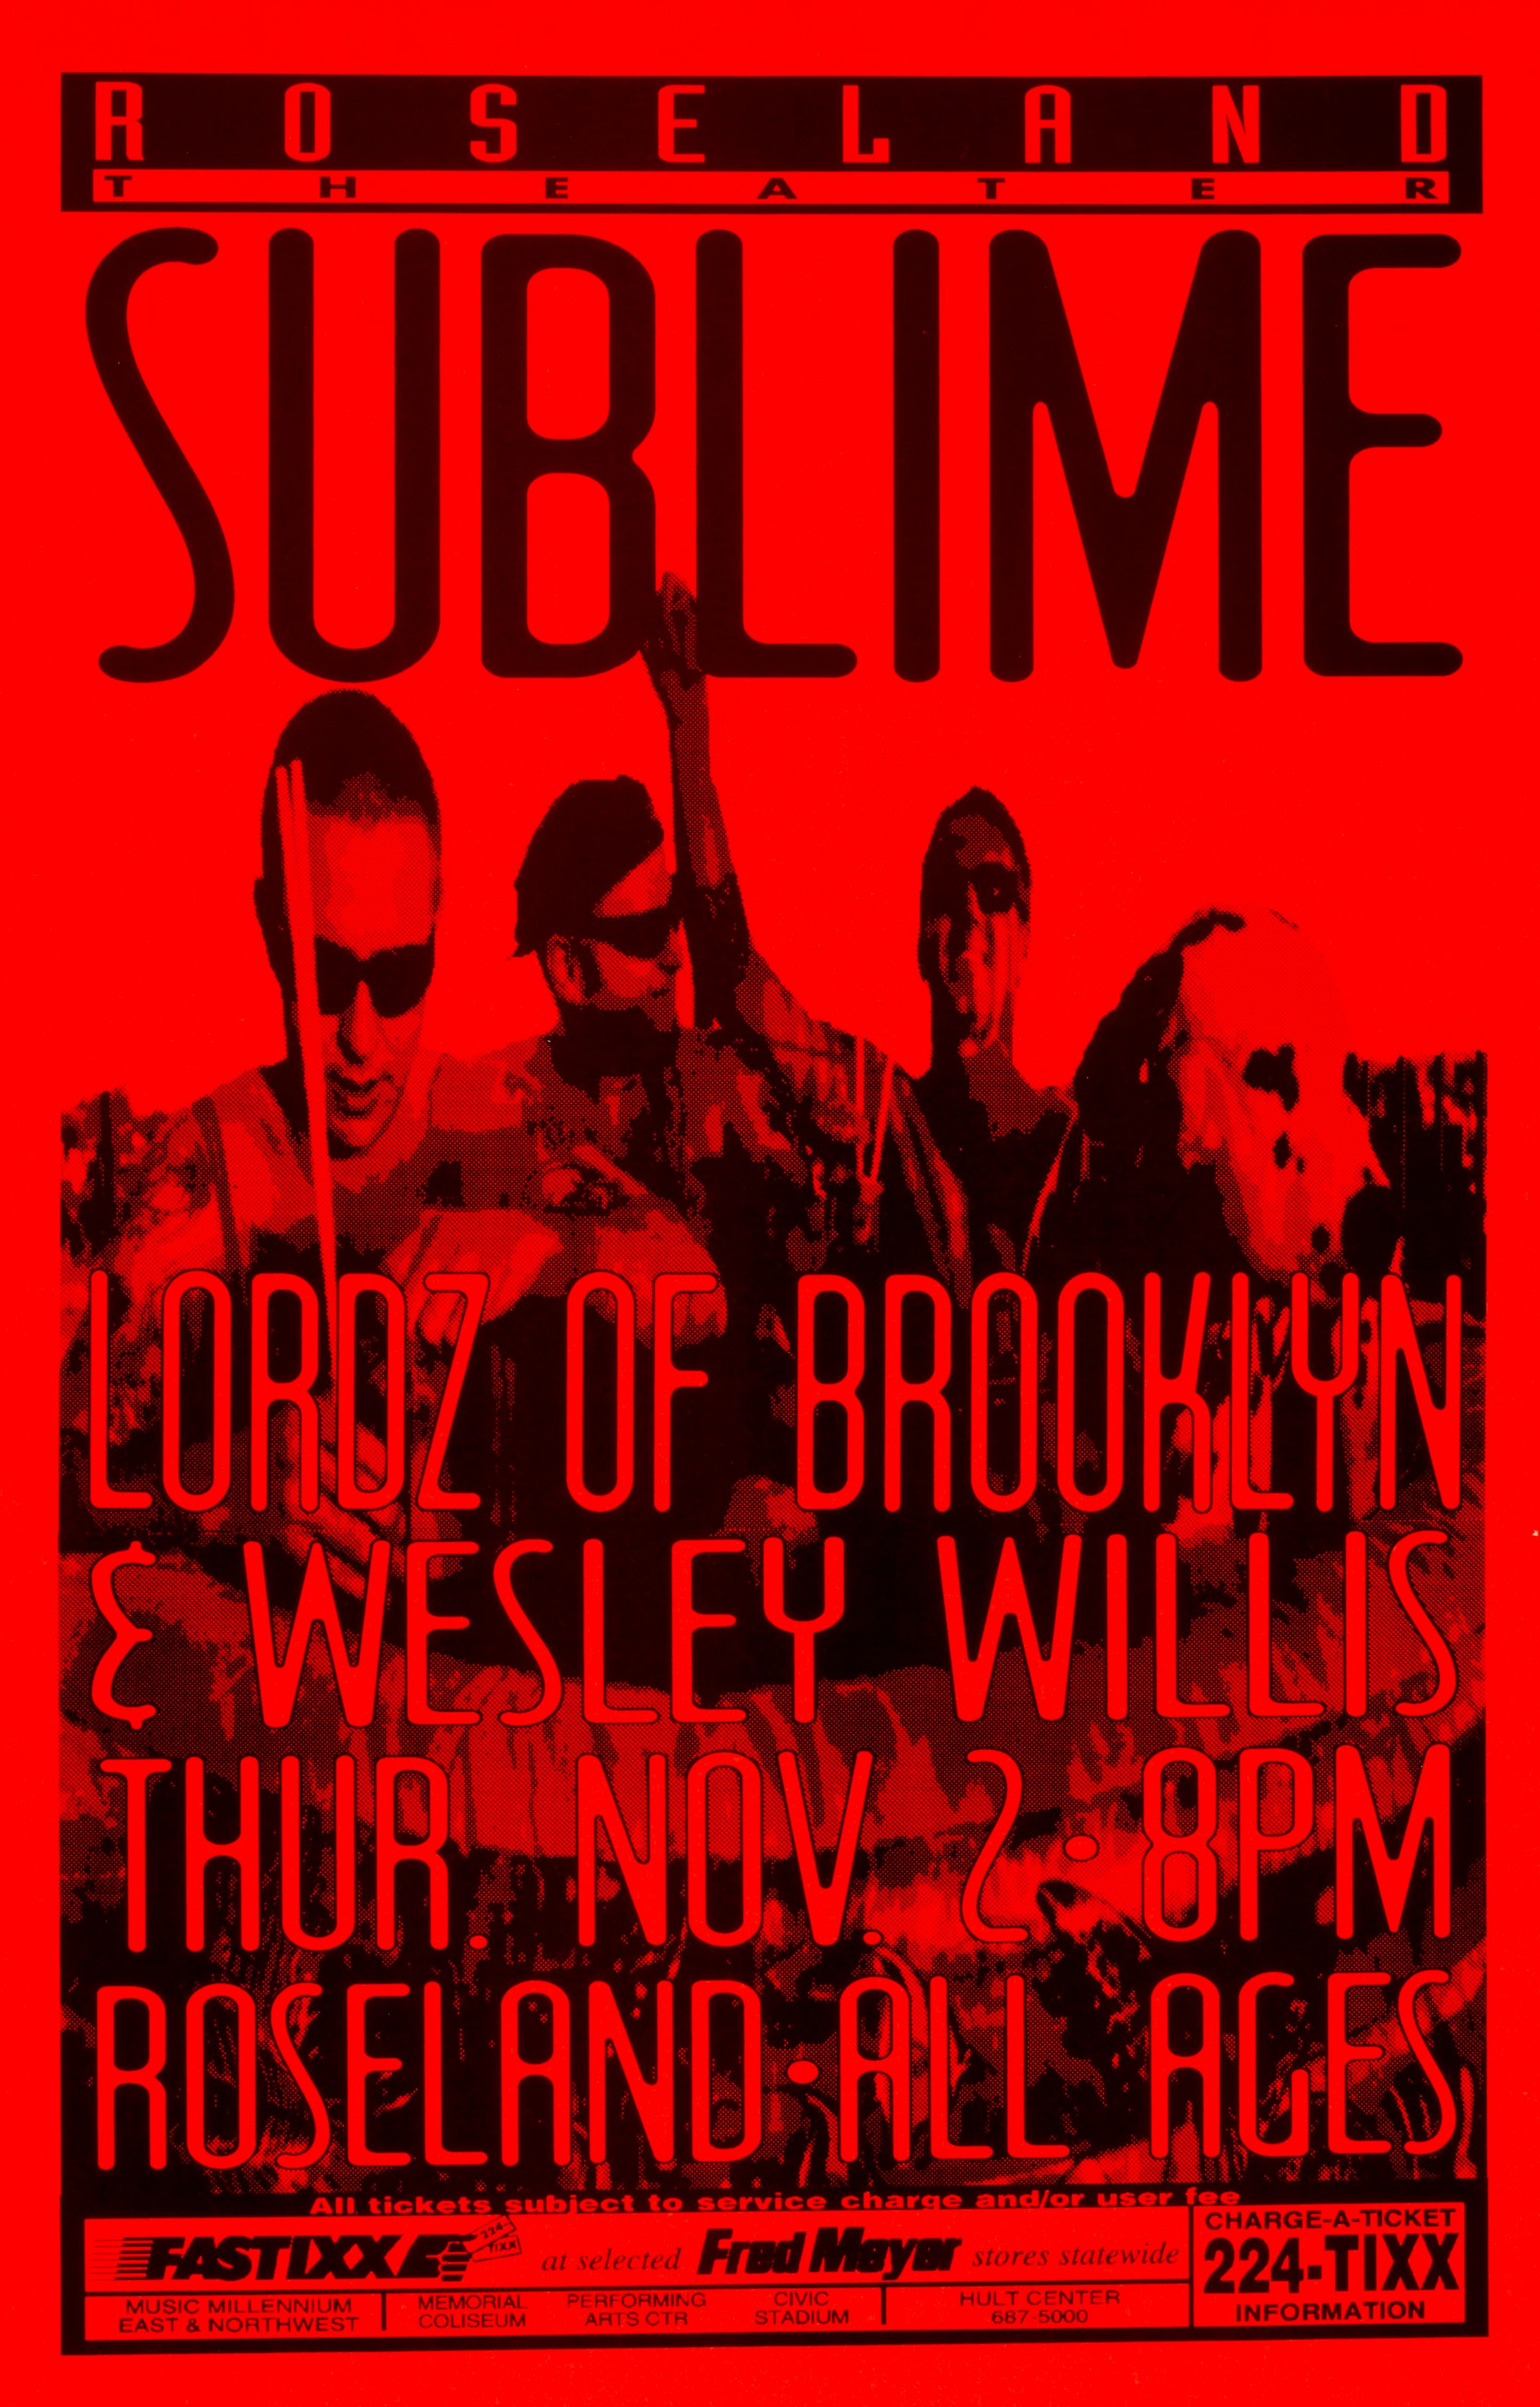 MXP-35.3 Sublime Roseland Theater 1995 Concert Poster